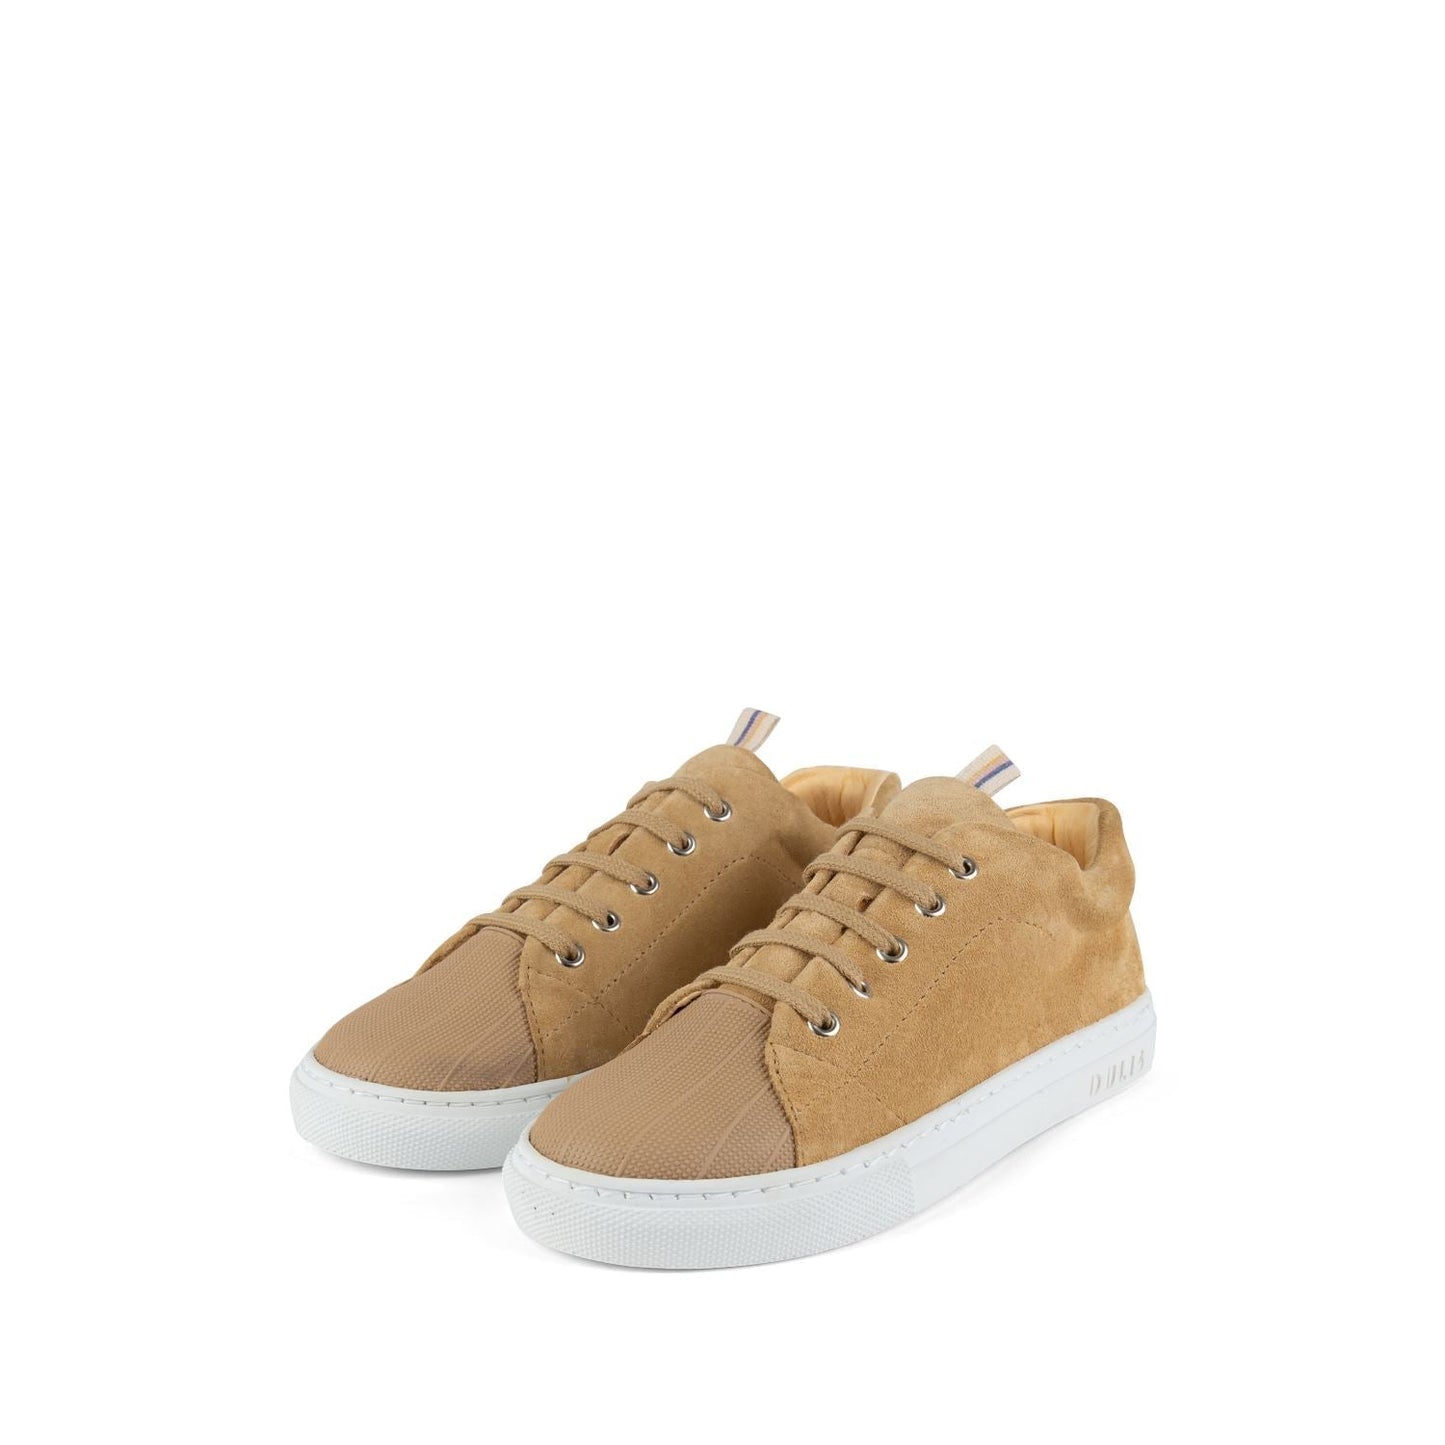 Beige Toe Sneakers Shoes Dulis Shoes 